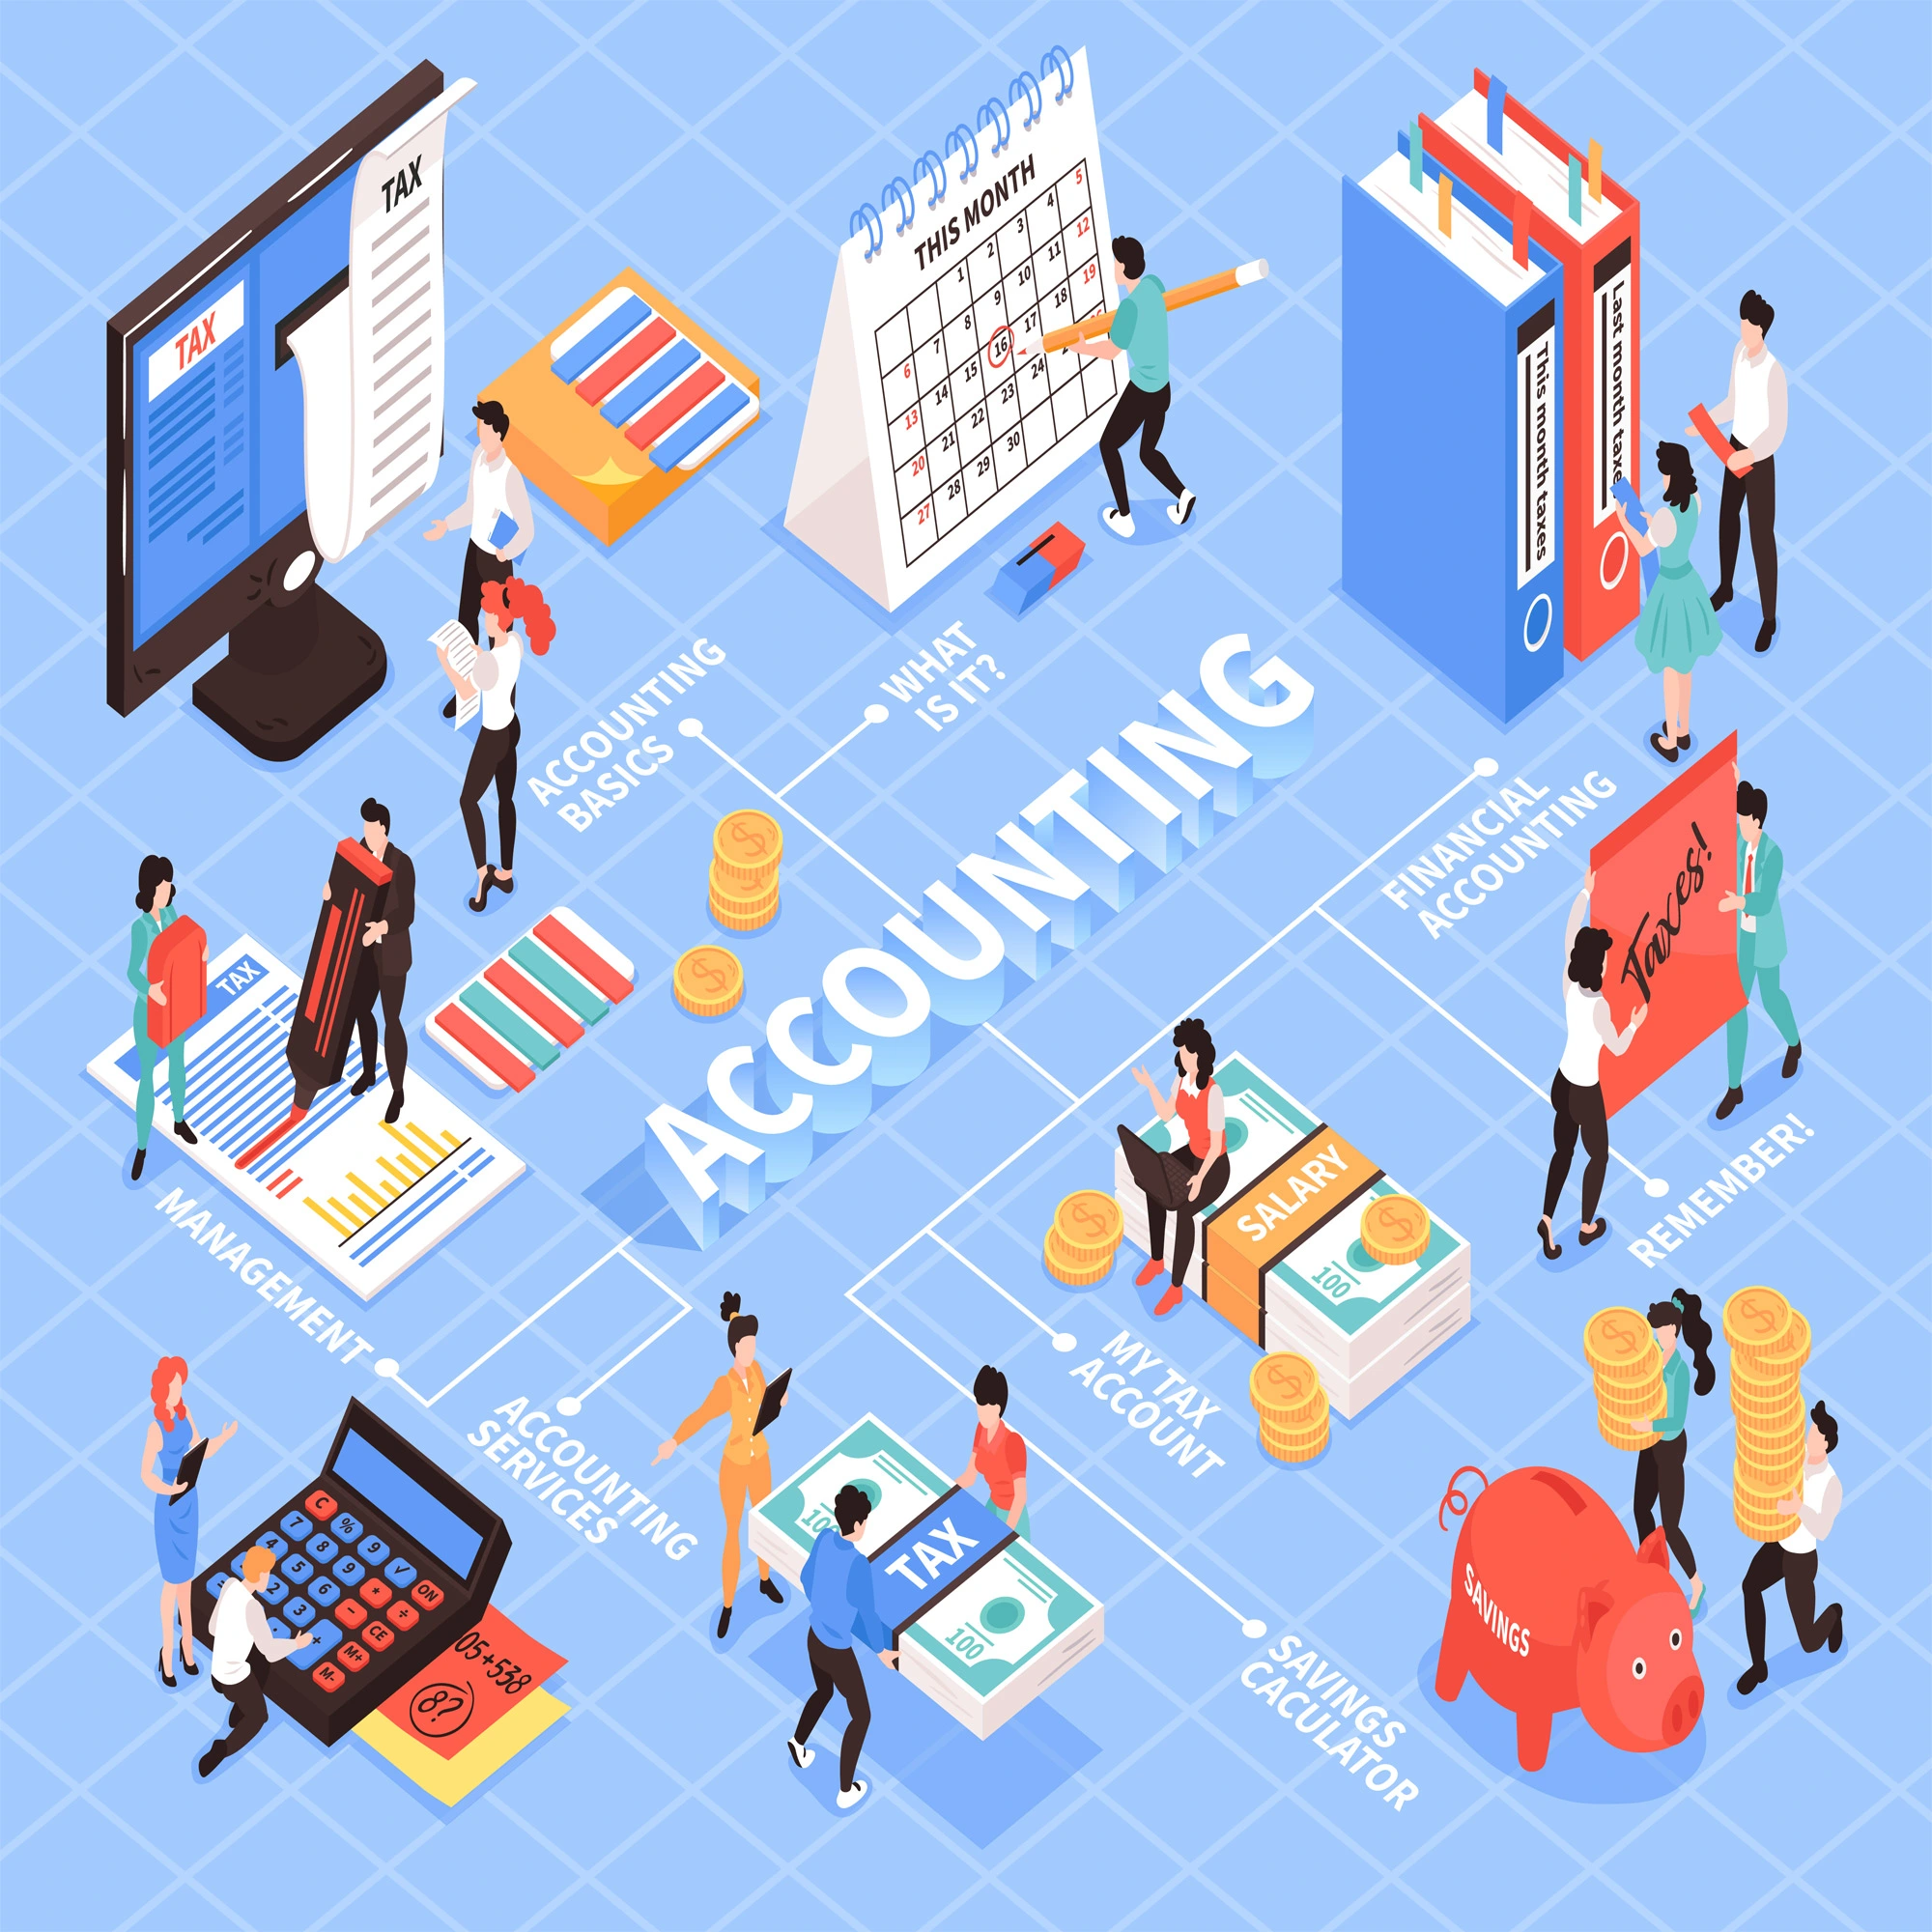 Stay organized and on top of your finances with our professional accounting and bookkeeping services